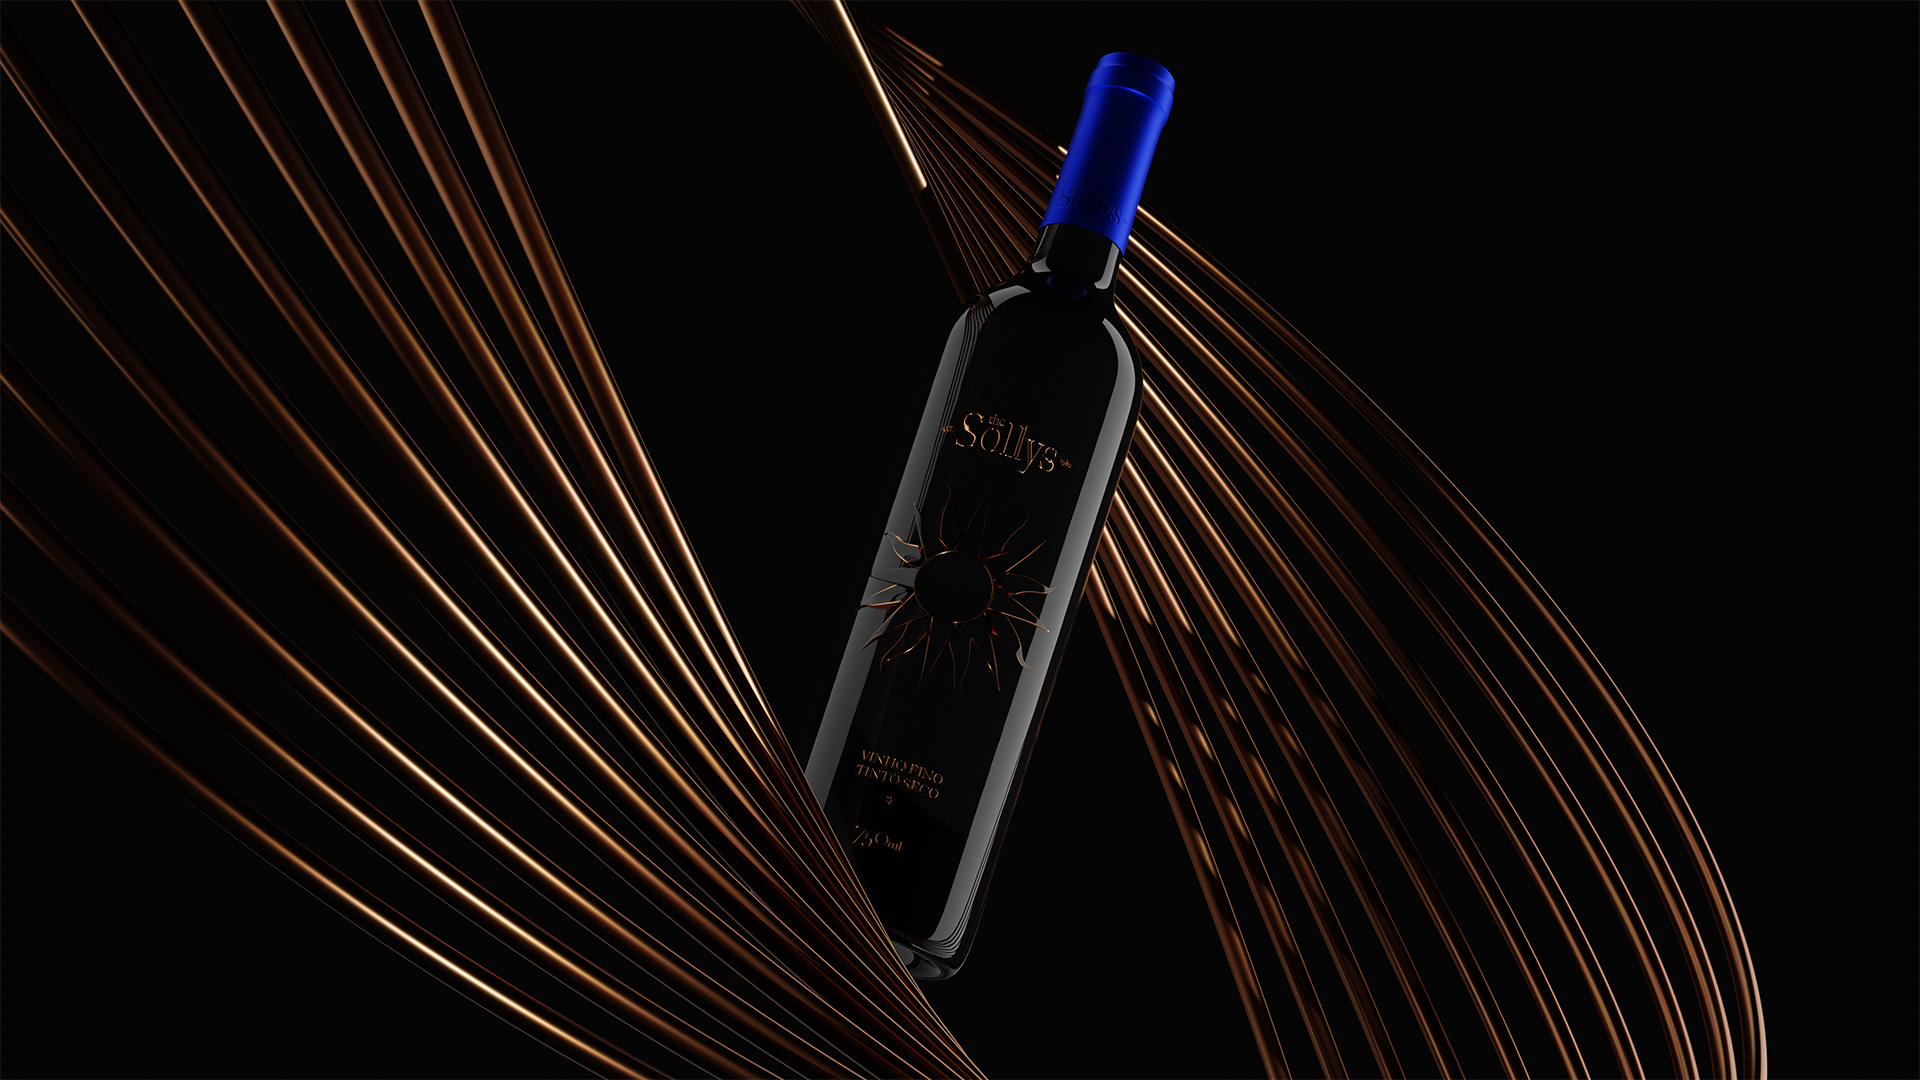 Gustavo Lacerda Create Brand and Product Design for The Sollys Brand Wines from Uruguay